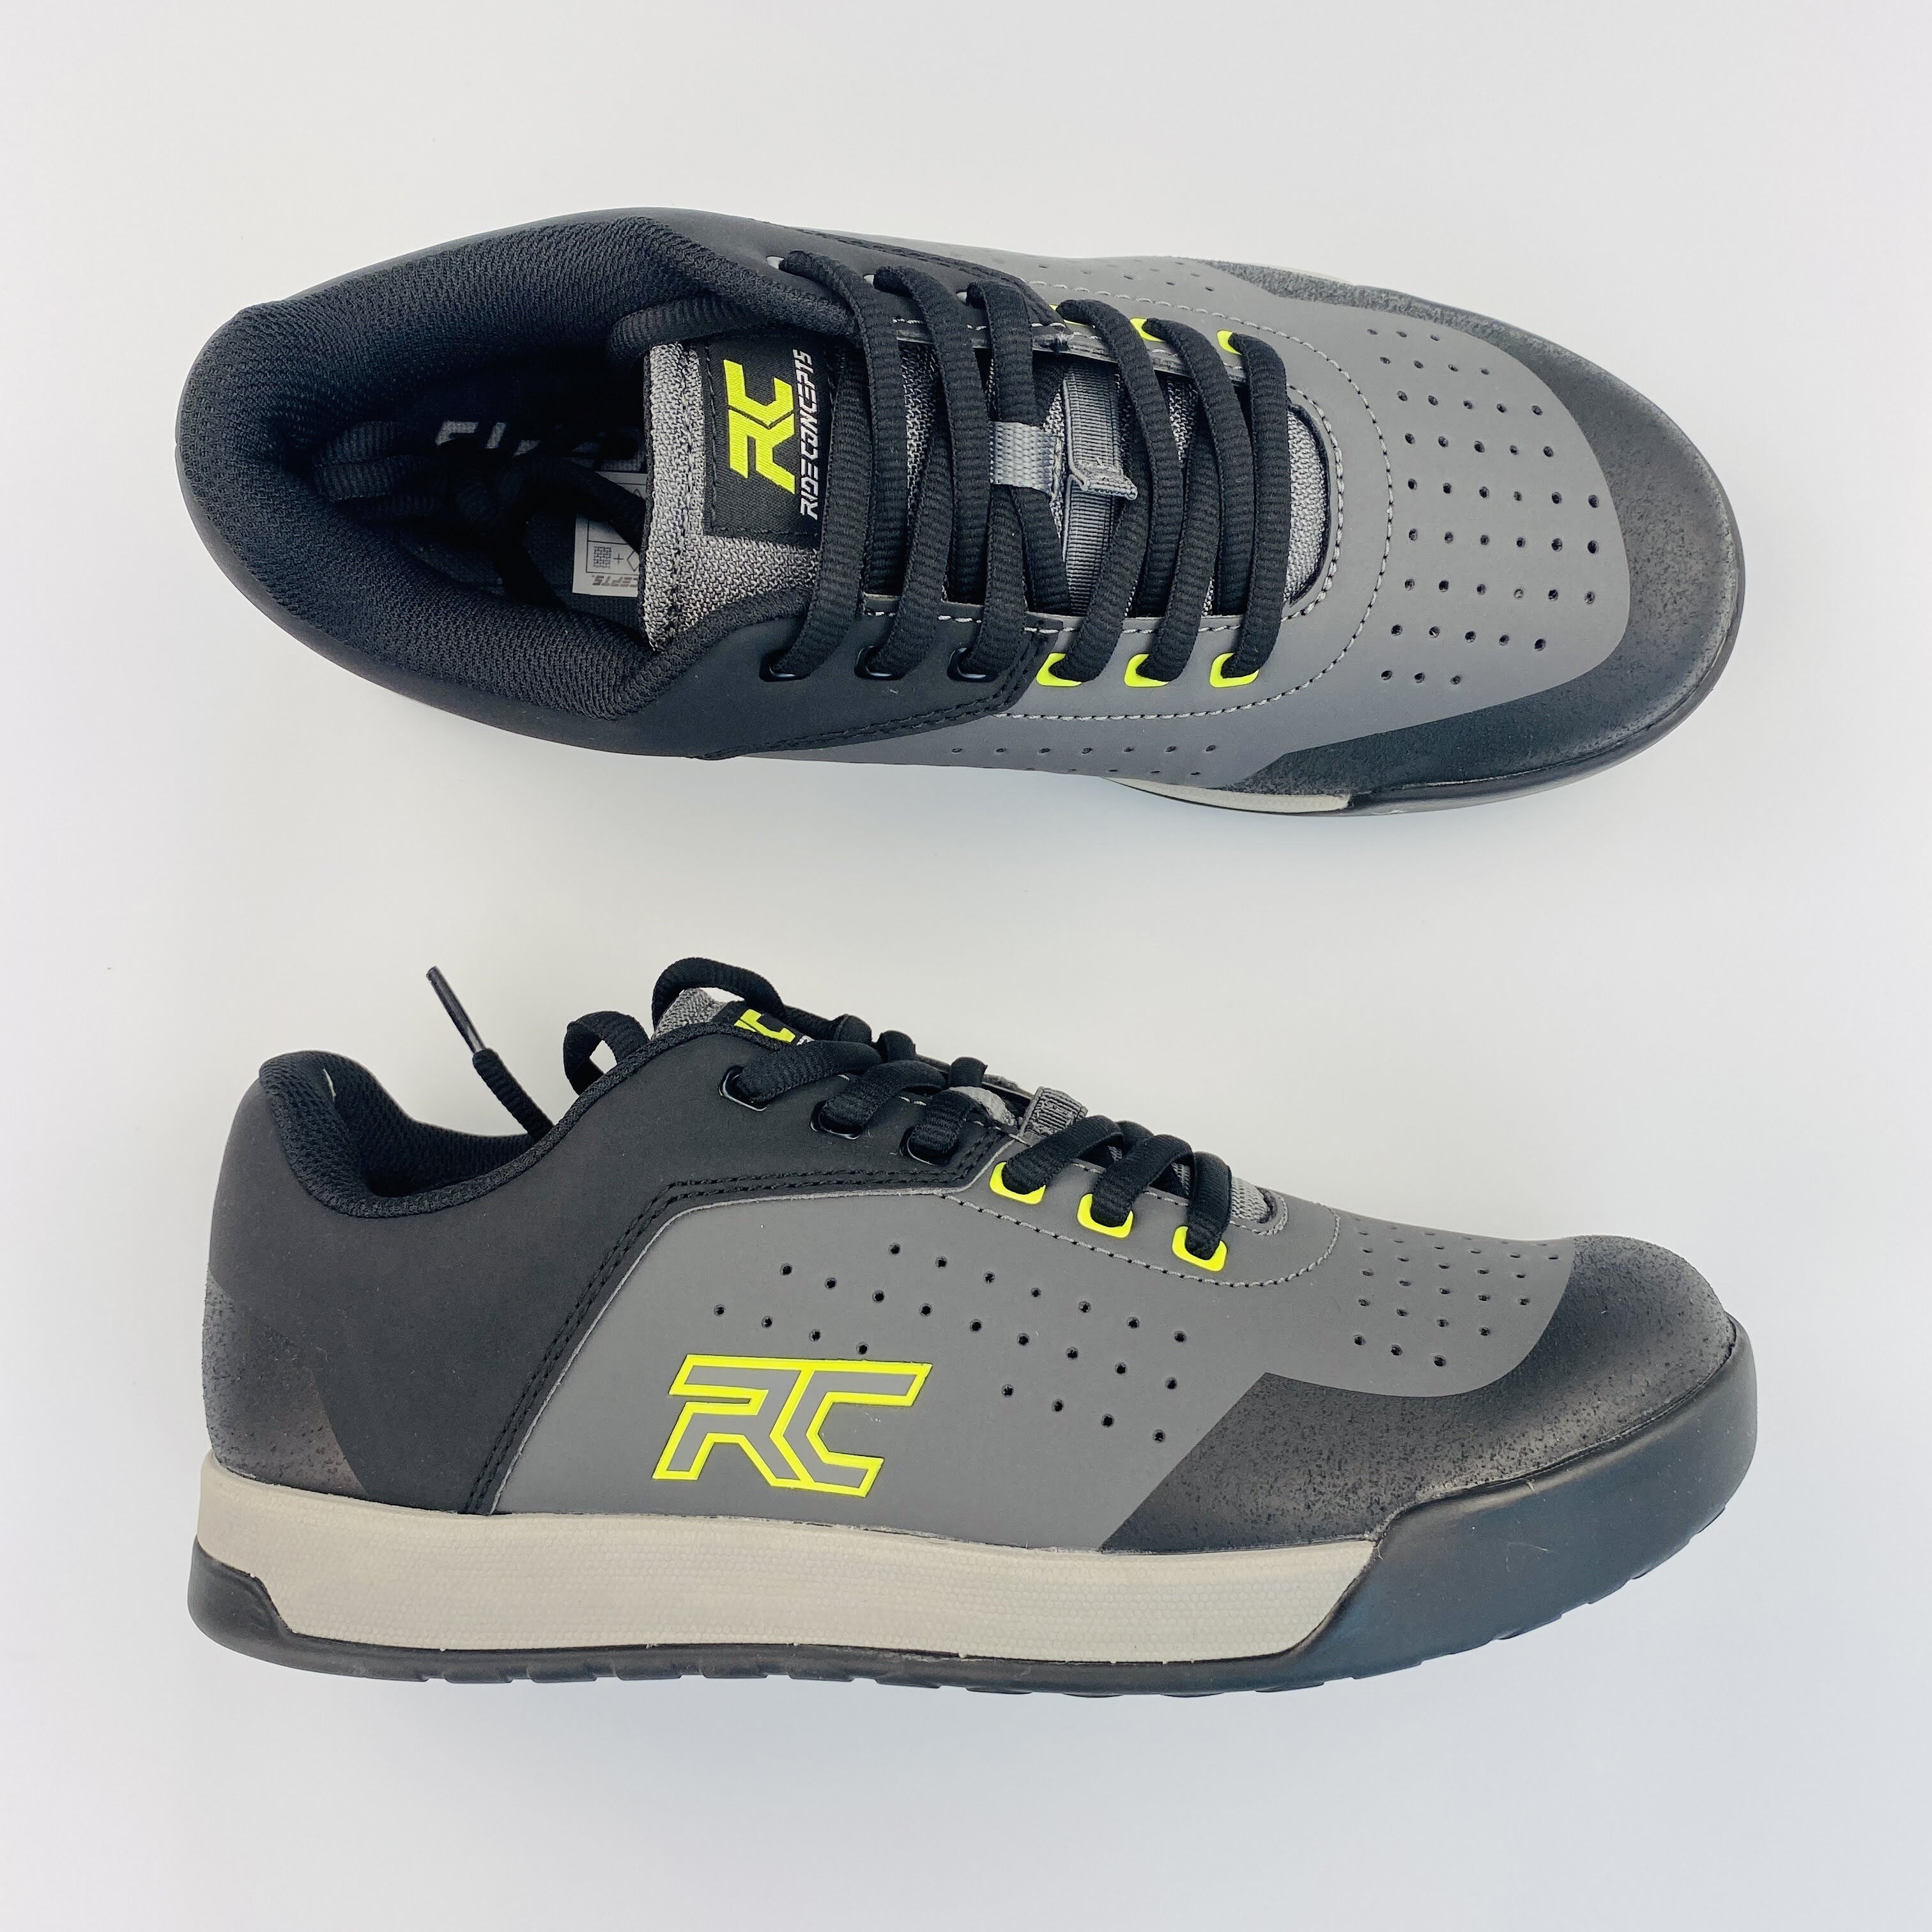 Ride Concepts Hellion - Seconde main Chaussures vélo homme - Gris - 42 | Hardloop